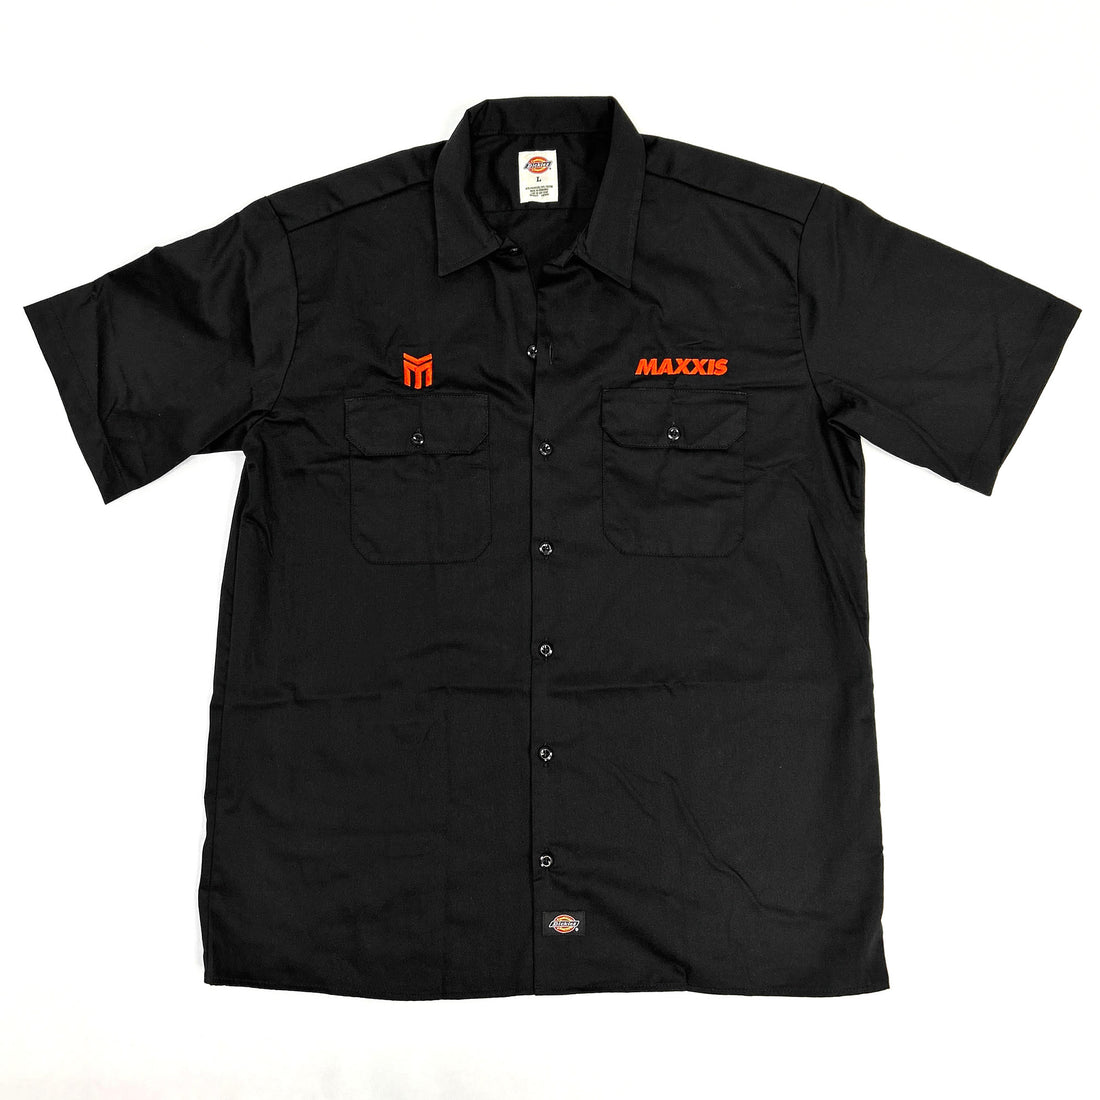 Maxxis Dickies Pit Shirt